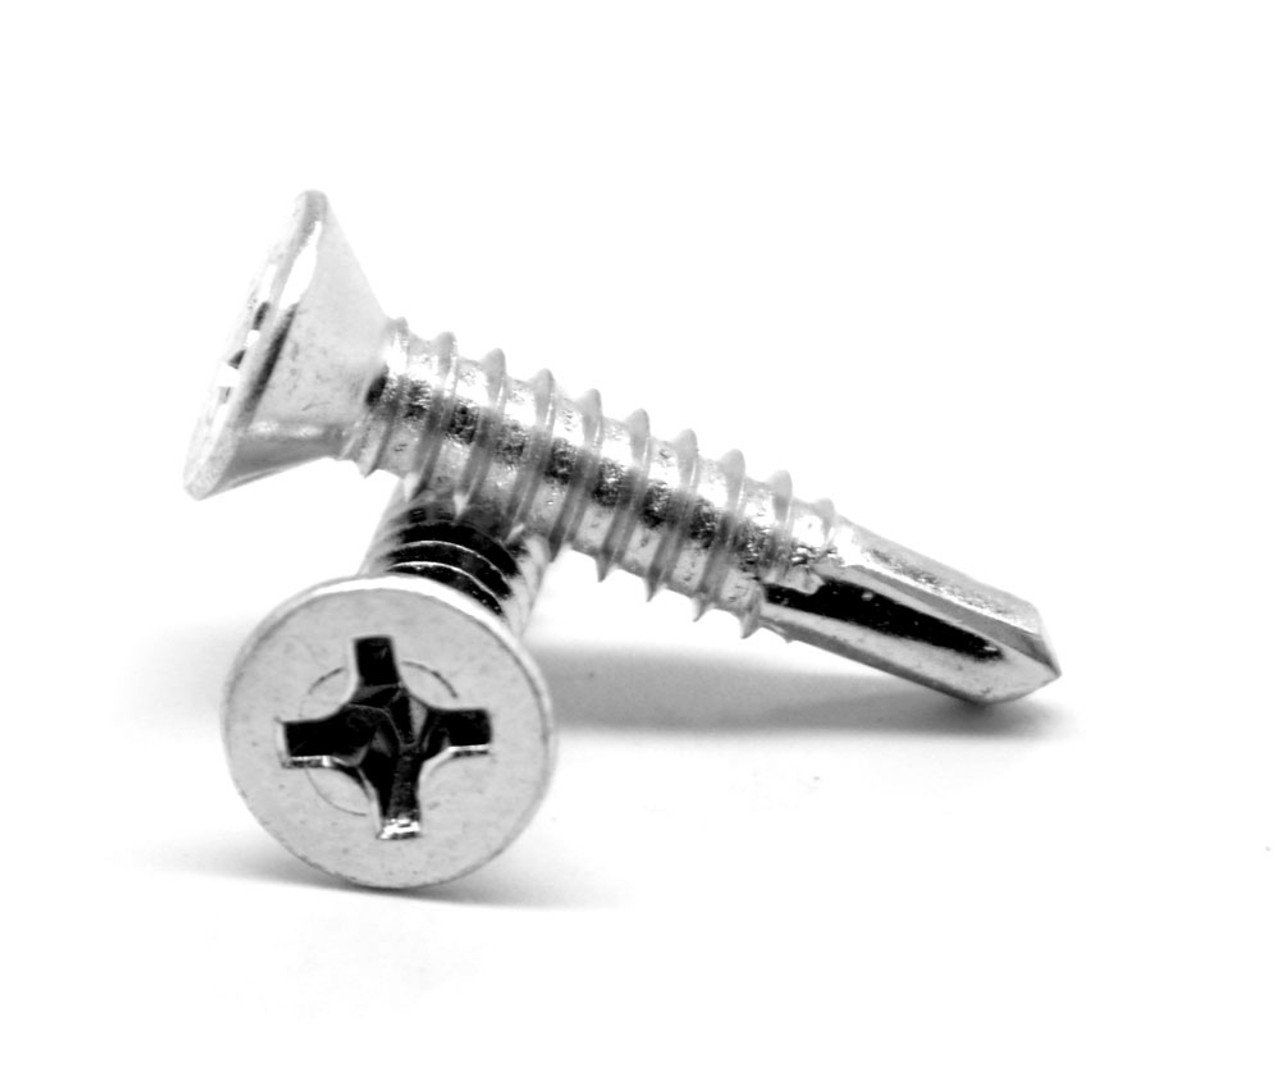 #10-16 x 1 1/2" (FT) Self Drilling Screw Phillips Flat Head #3 Point Stainless Steel 18-8